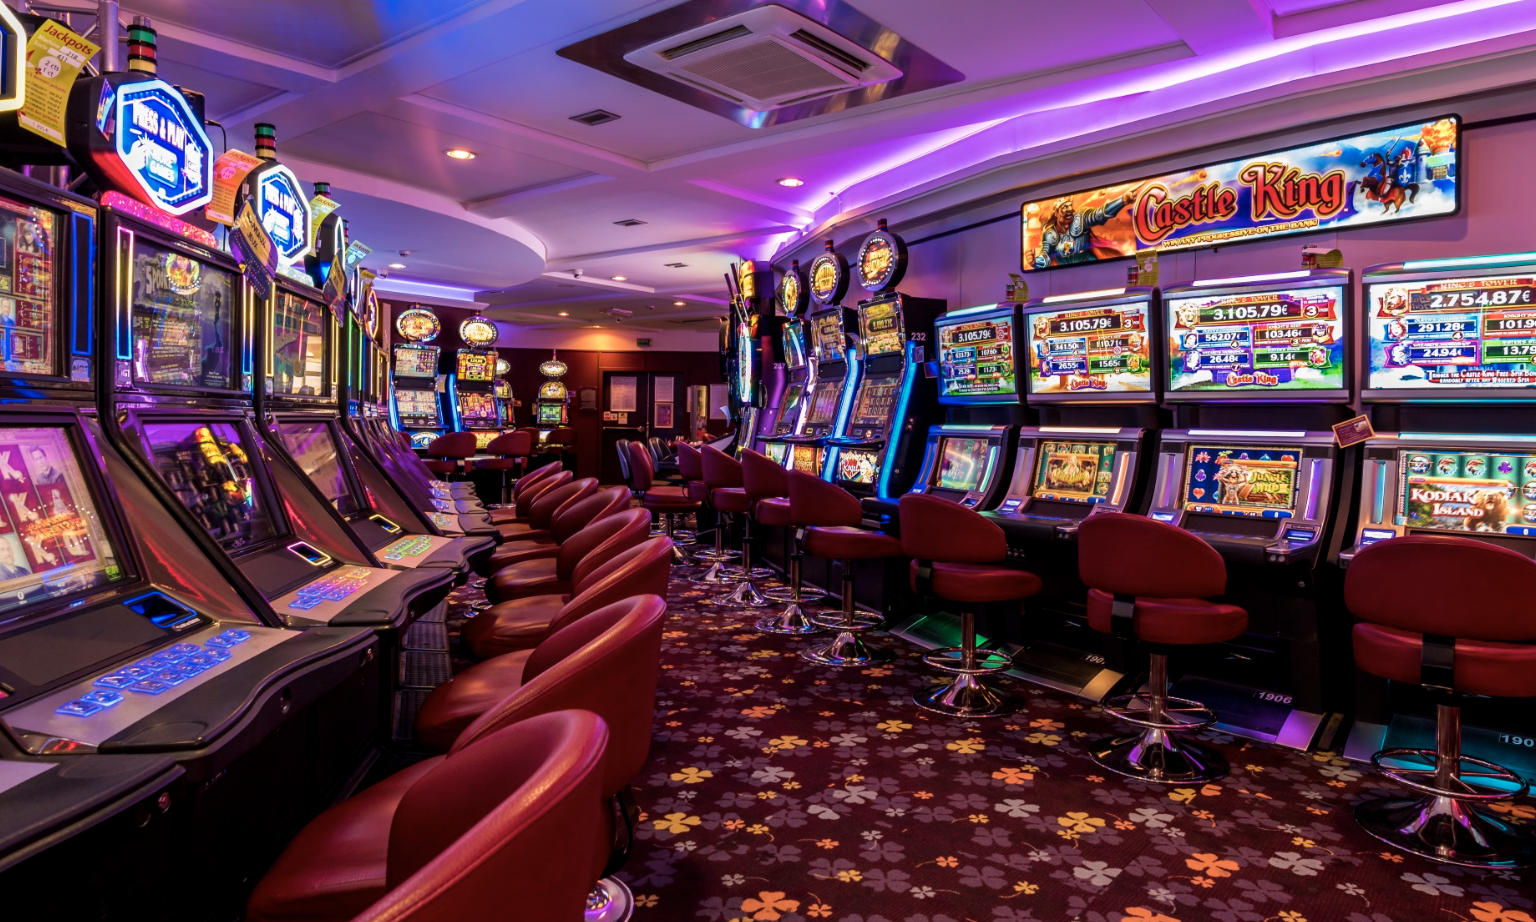 Best Paying Casinos